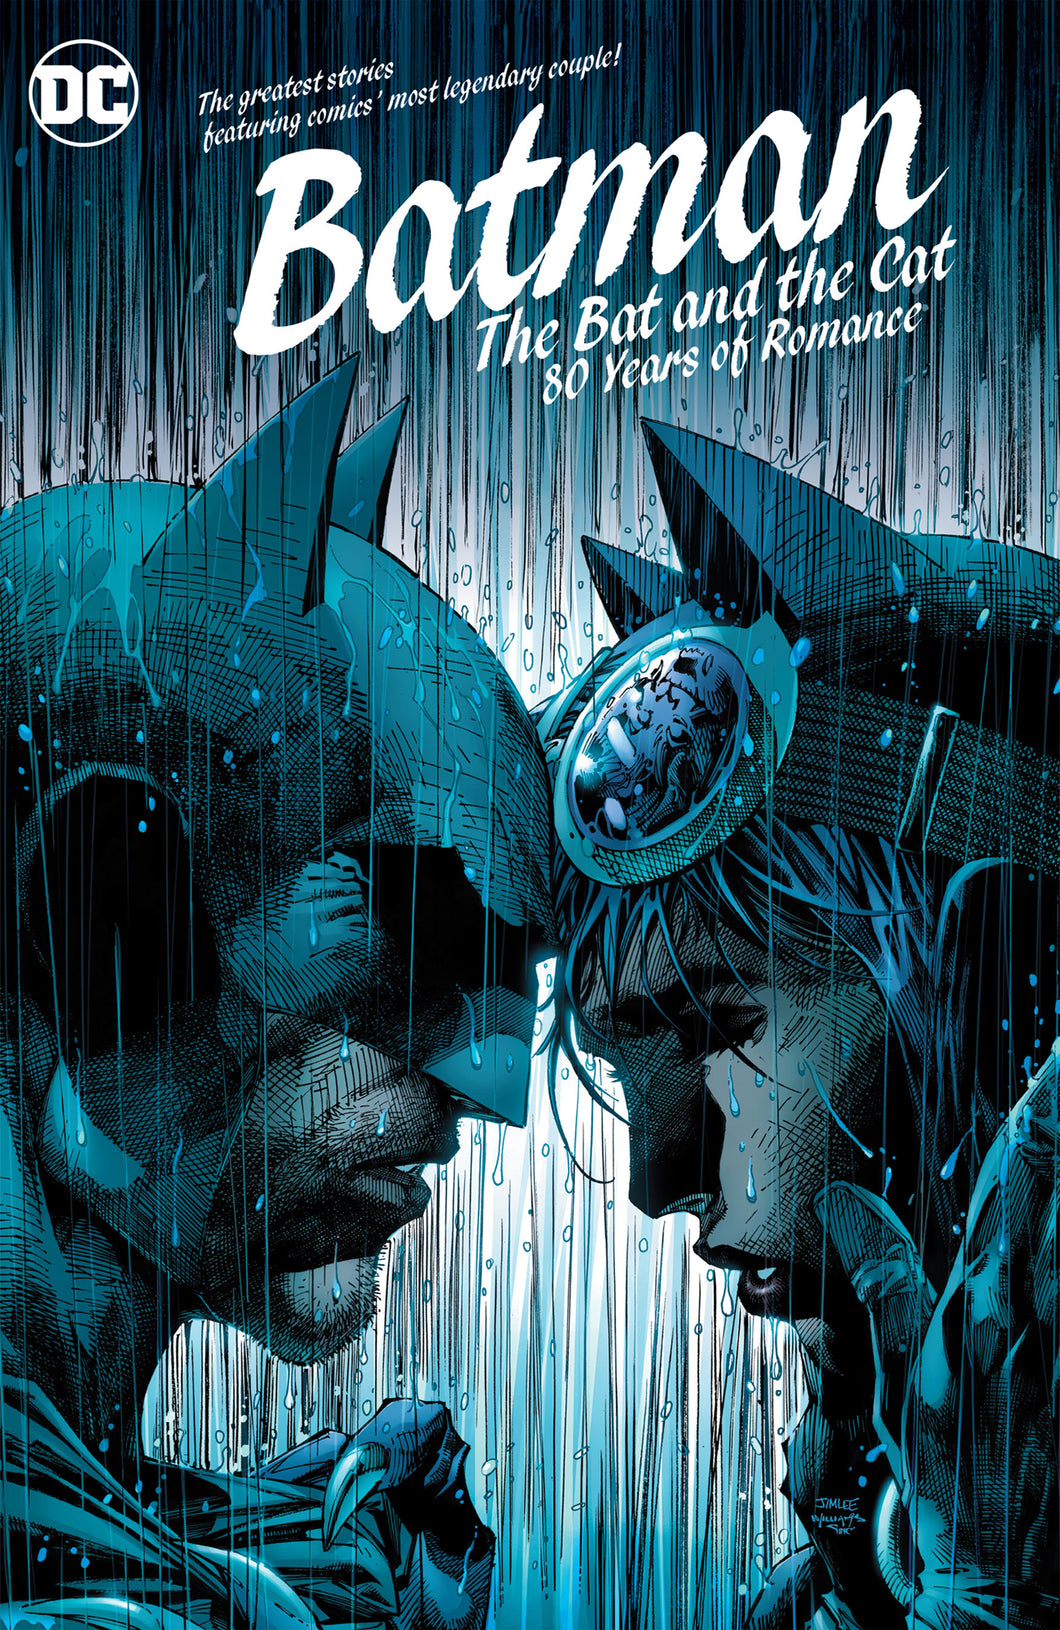 Bat And the Cat:TPB: 80 Years